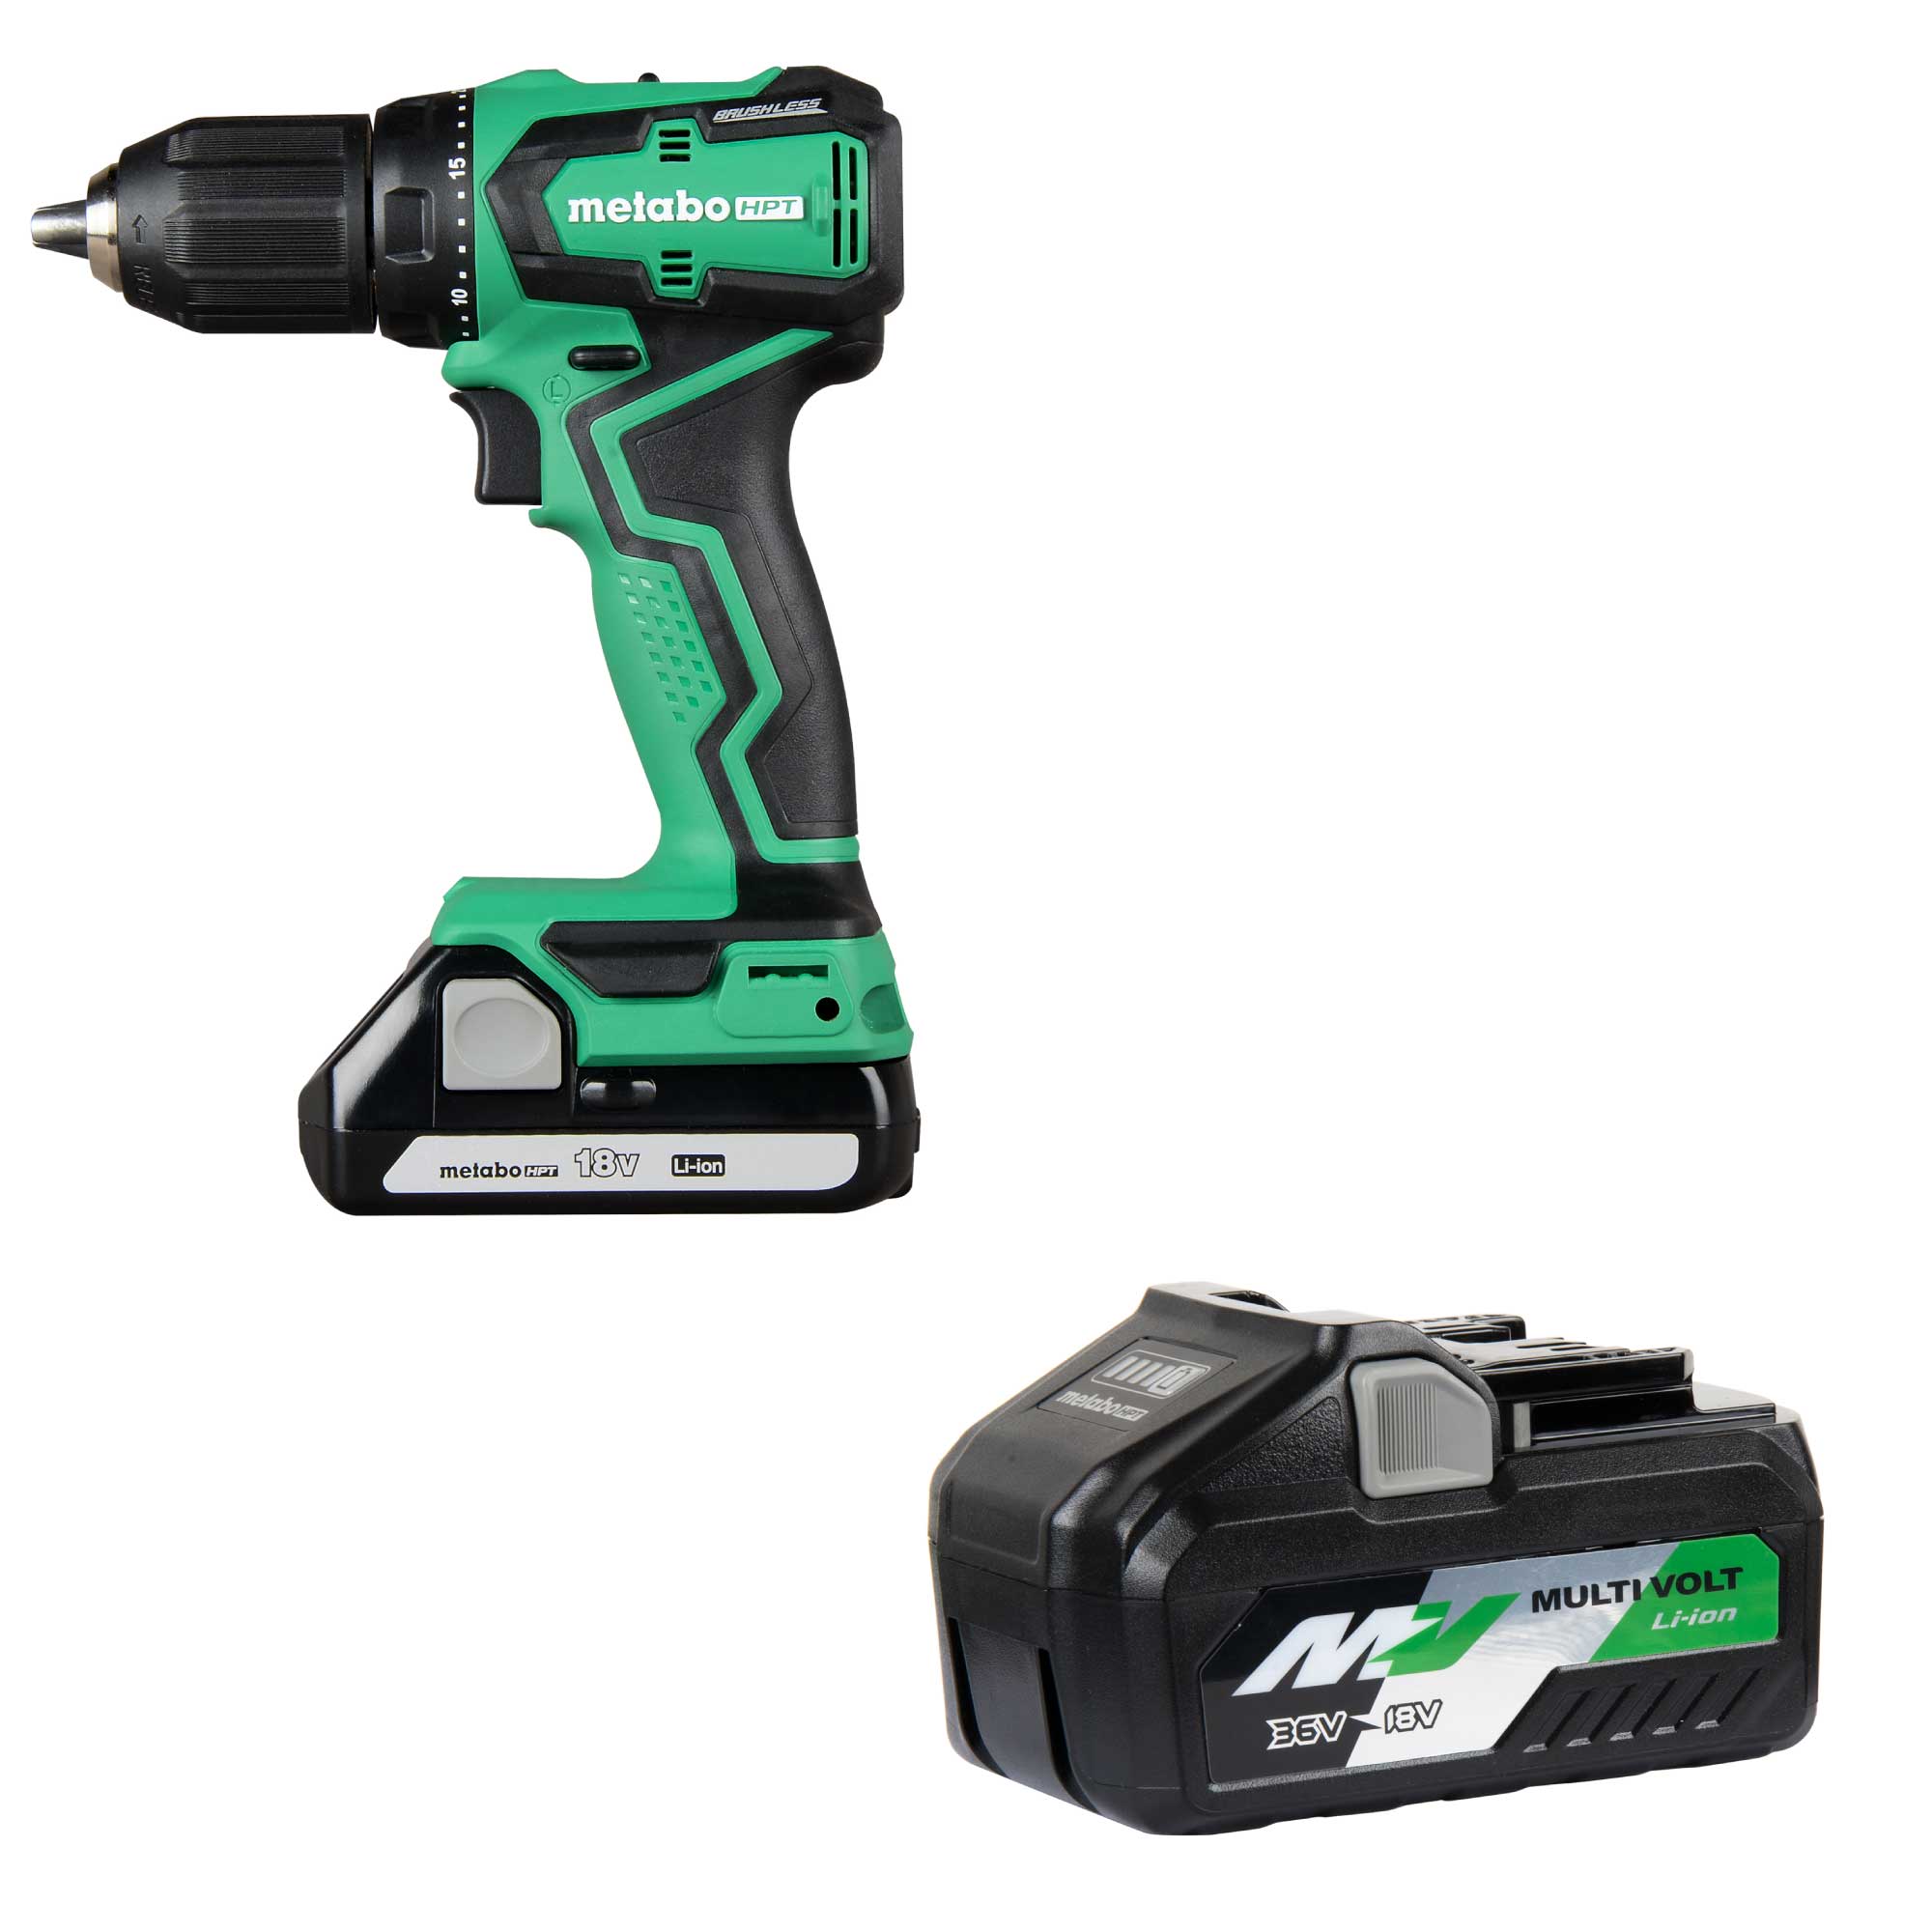 Metabo HPT MultiVolt 18-volt 1/2-in Keyless Brushless Cordless Drill (2-batteries included and Charger included) with MultiVolt 4.0Ah/8.0Ah Power